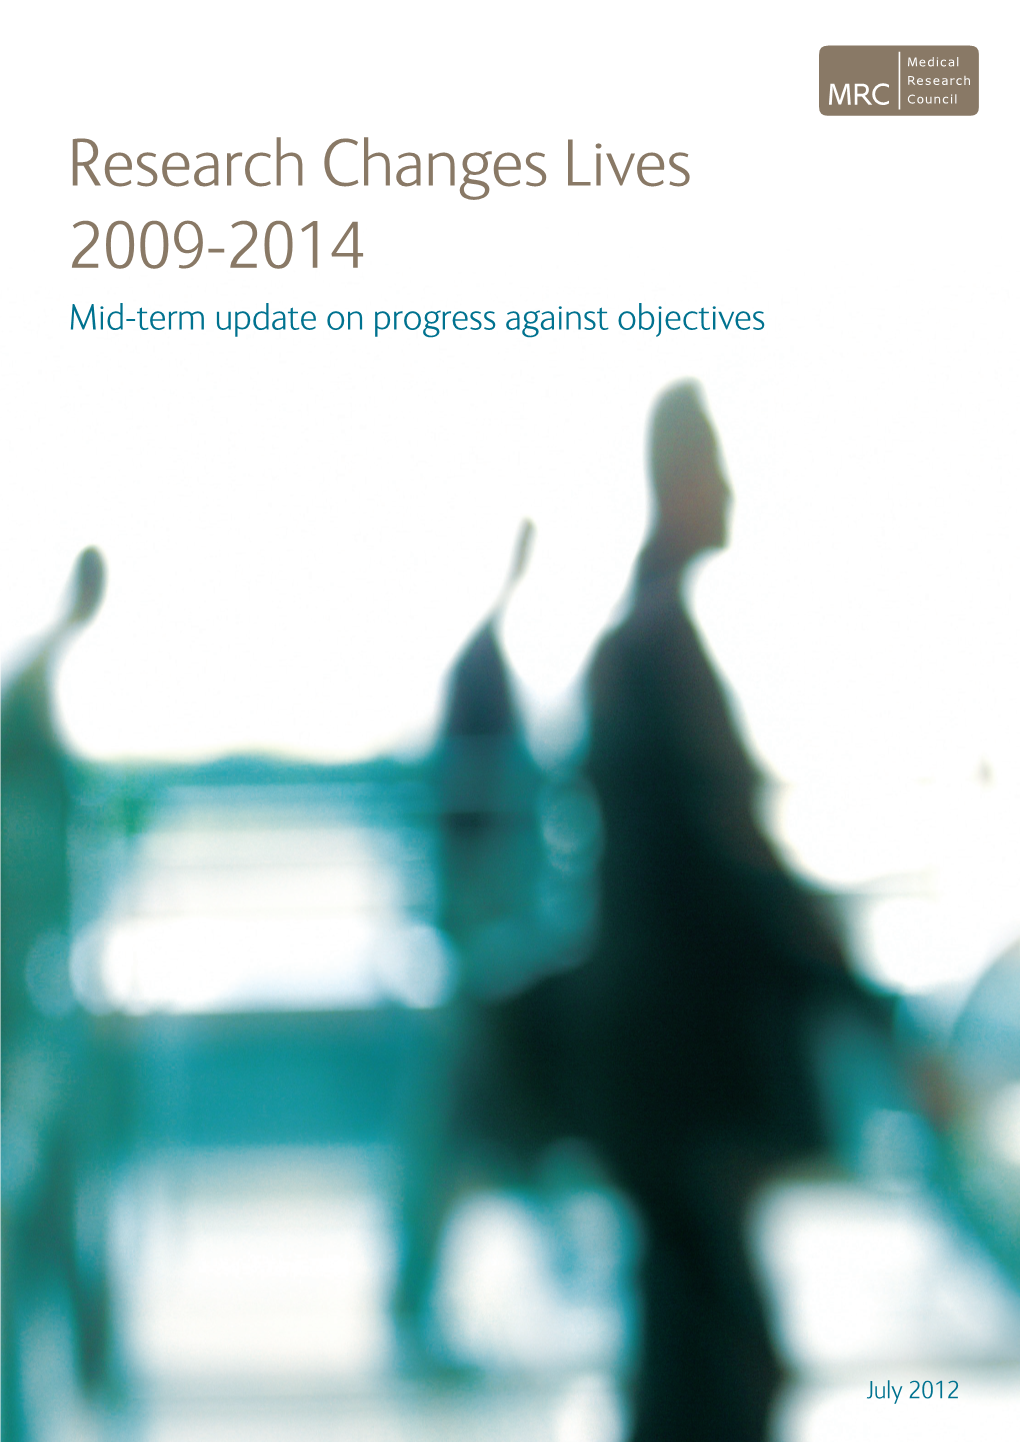 Research Changes Lives 2009-2014 Mid-Term Update on Progress Against Objectives